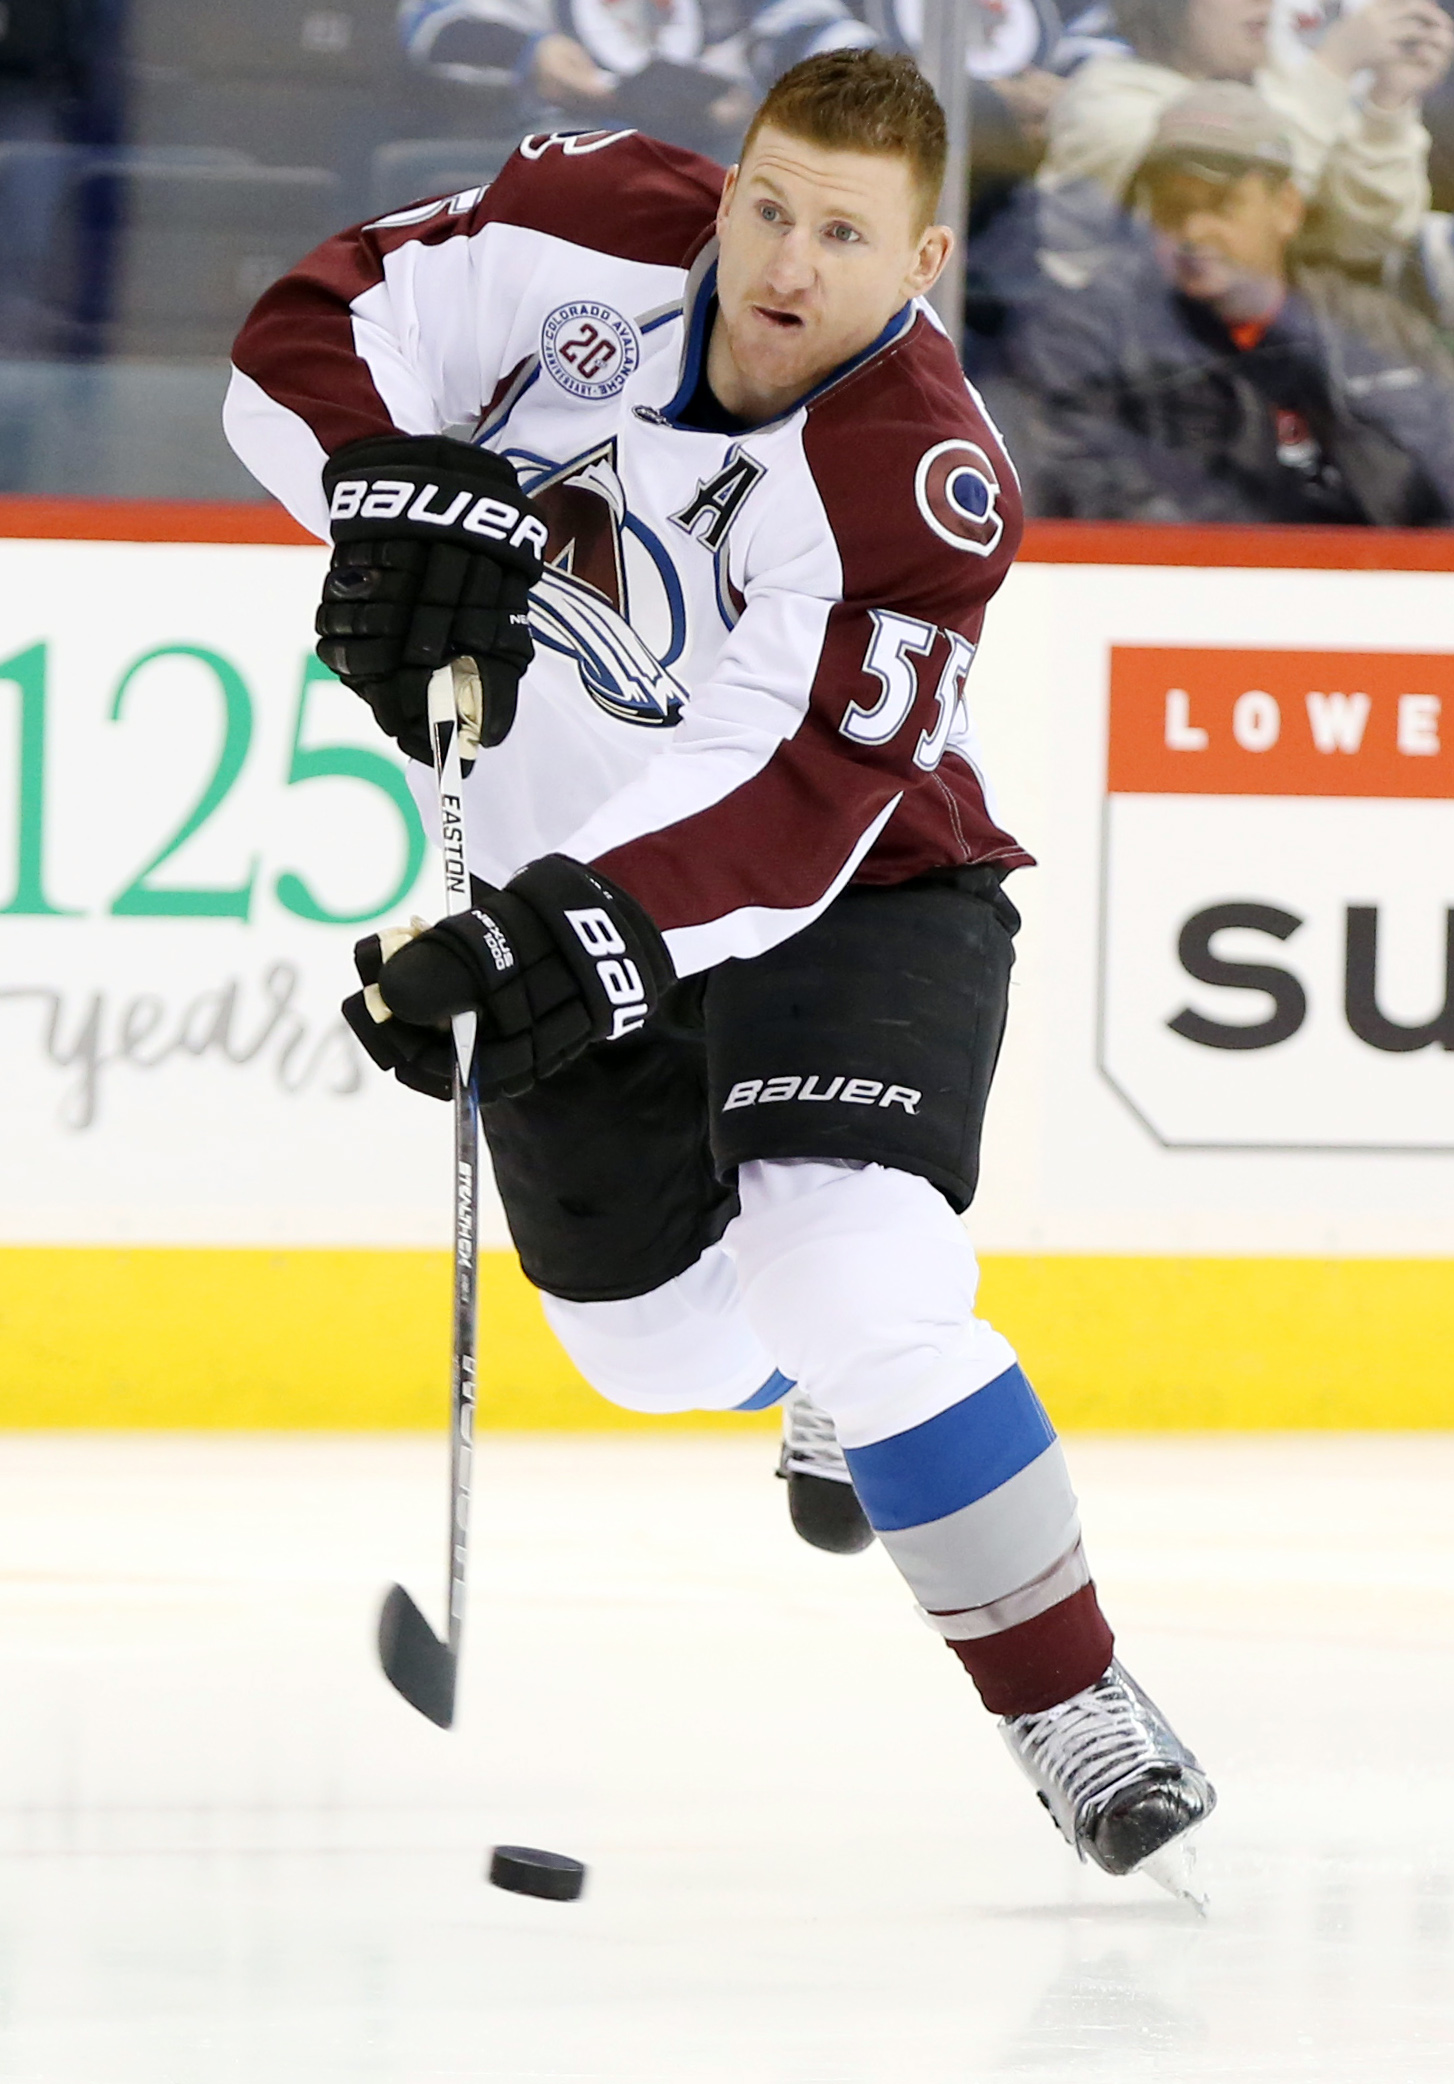 Cody McLeod, part of the Avalanche dynasty